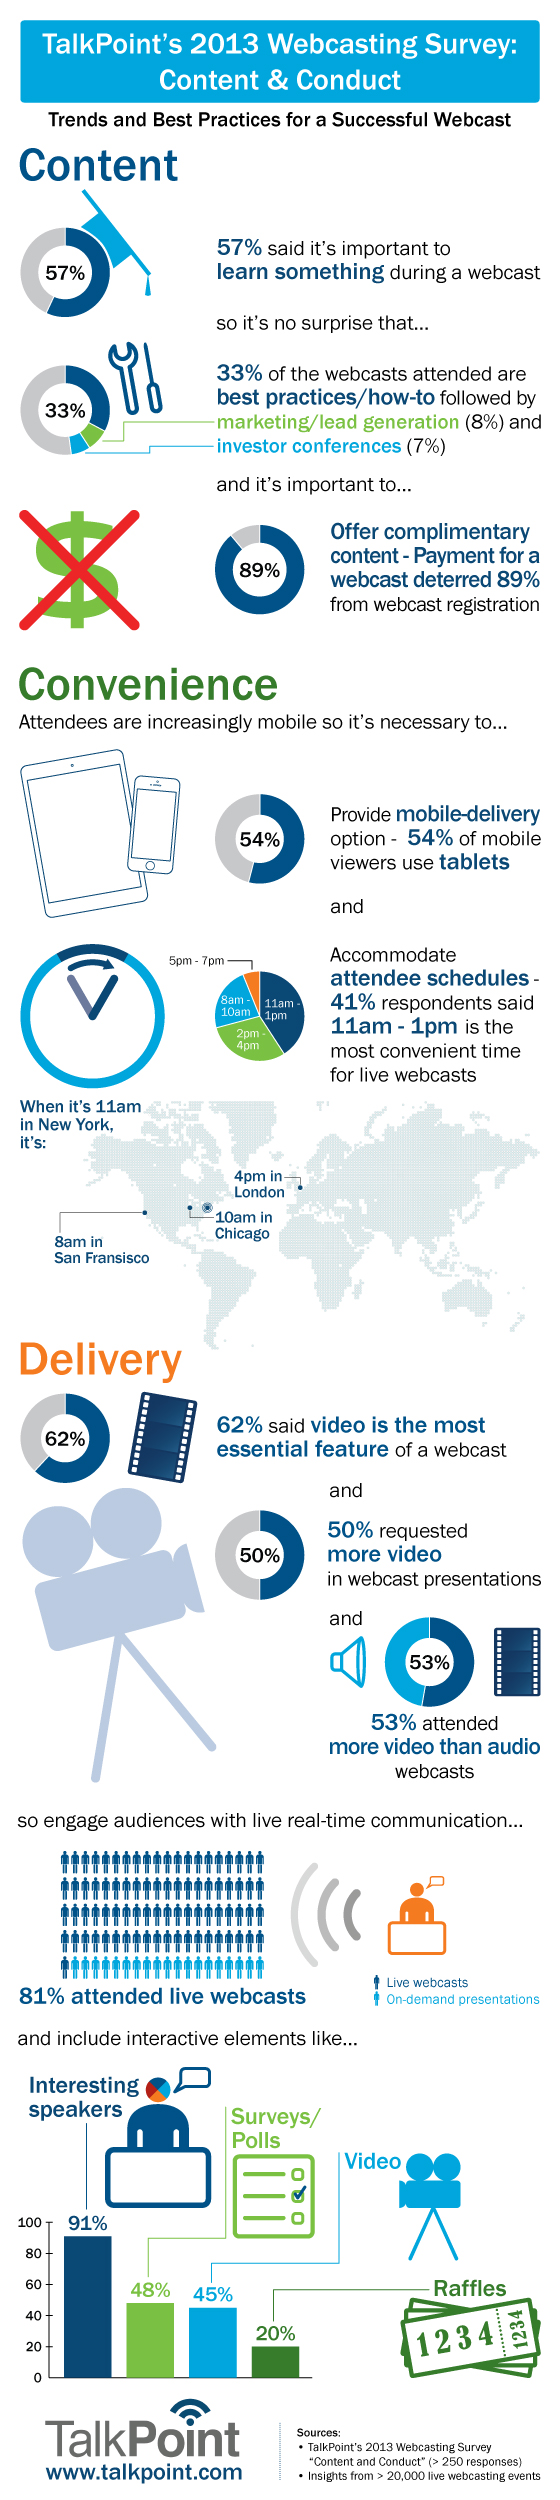 TalkPoint 2013 Webcasting Survey Infographic